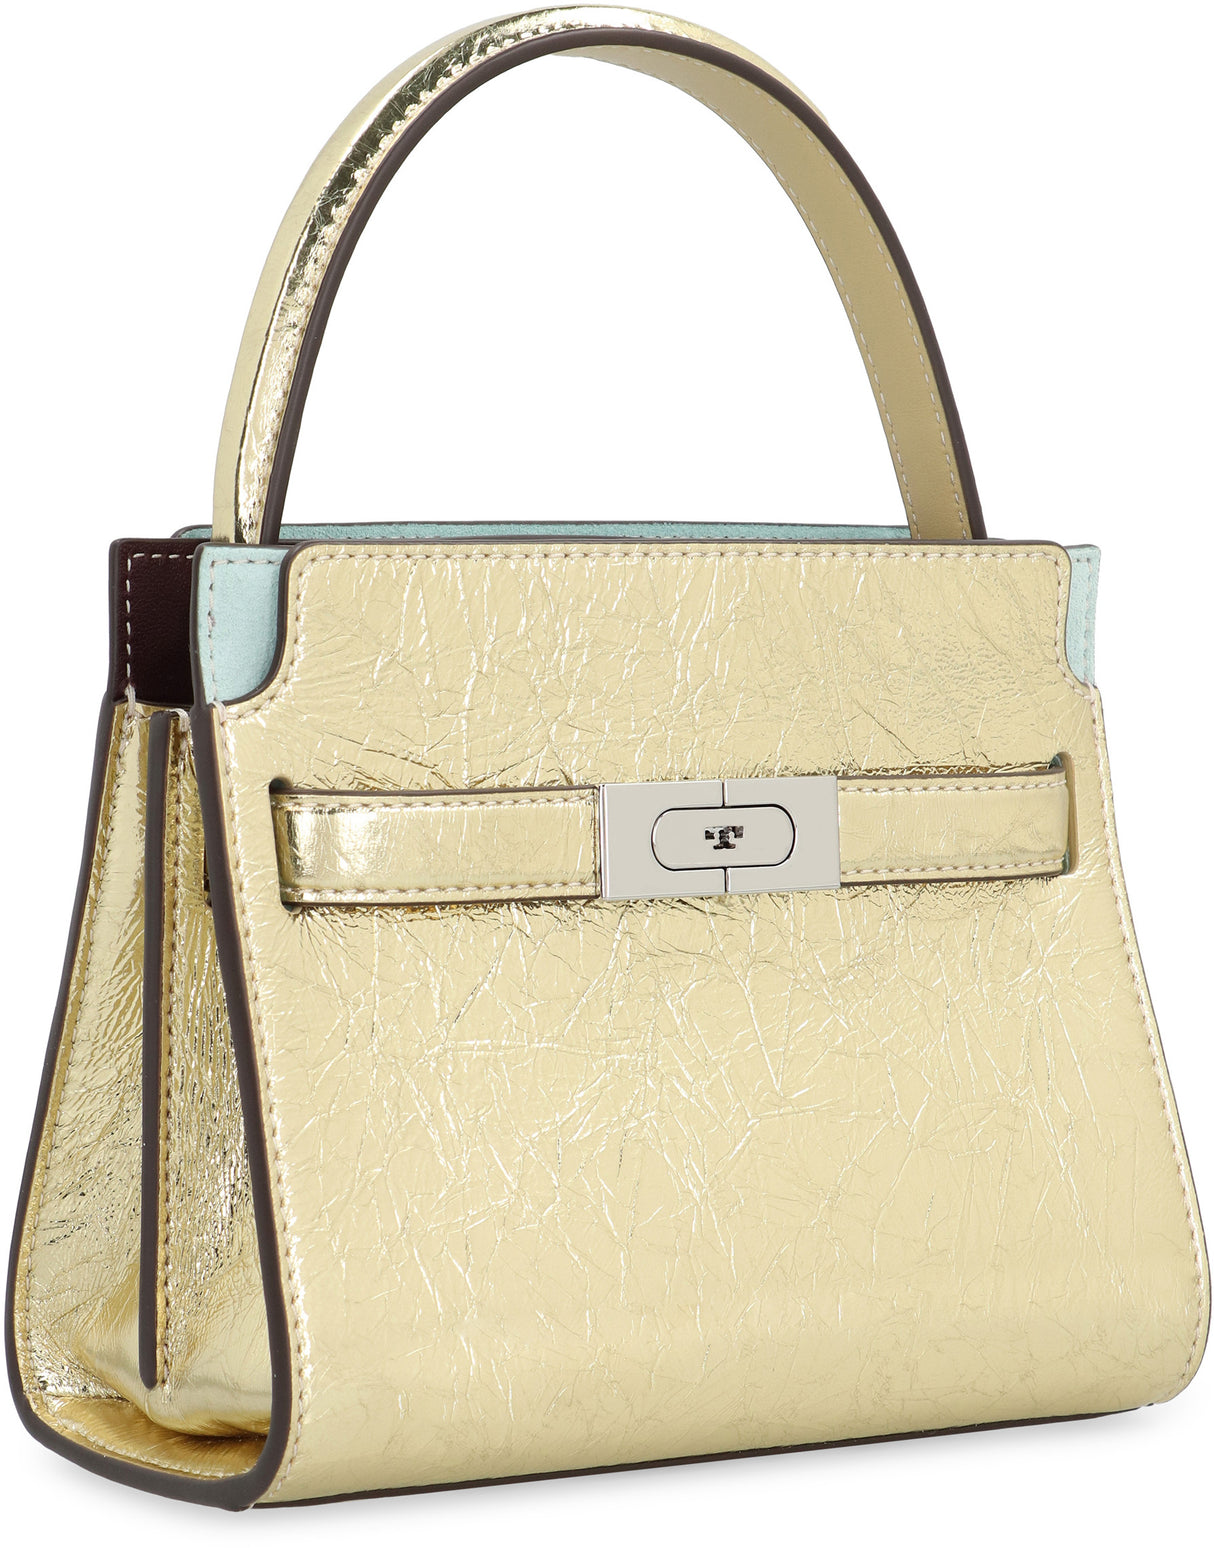 TORY BURCH Mini Lee Radziwill Metallic Gold Leather Handbag with Suede Accents and Silver-Tone Hardware - 19x16x9.5 cm